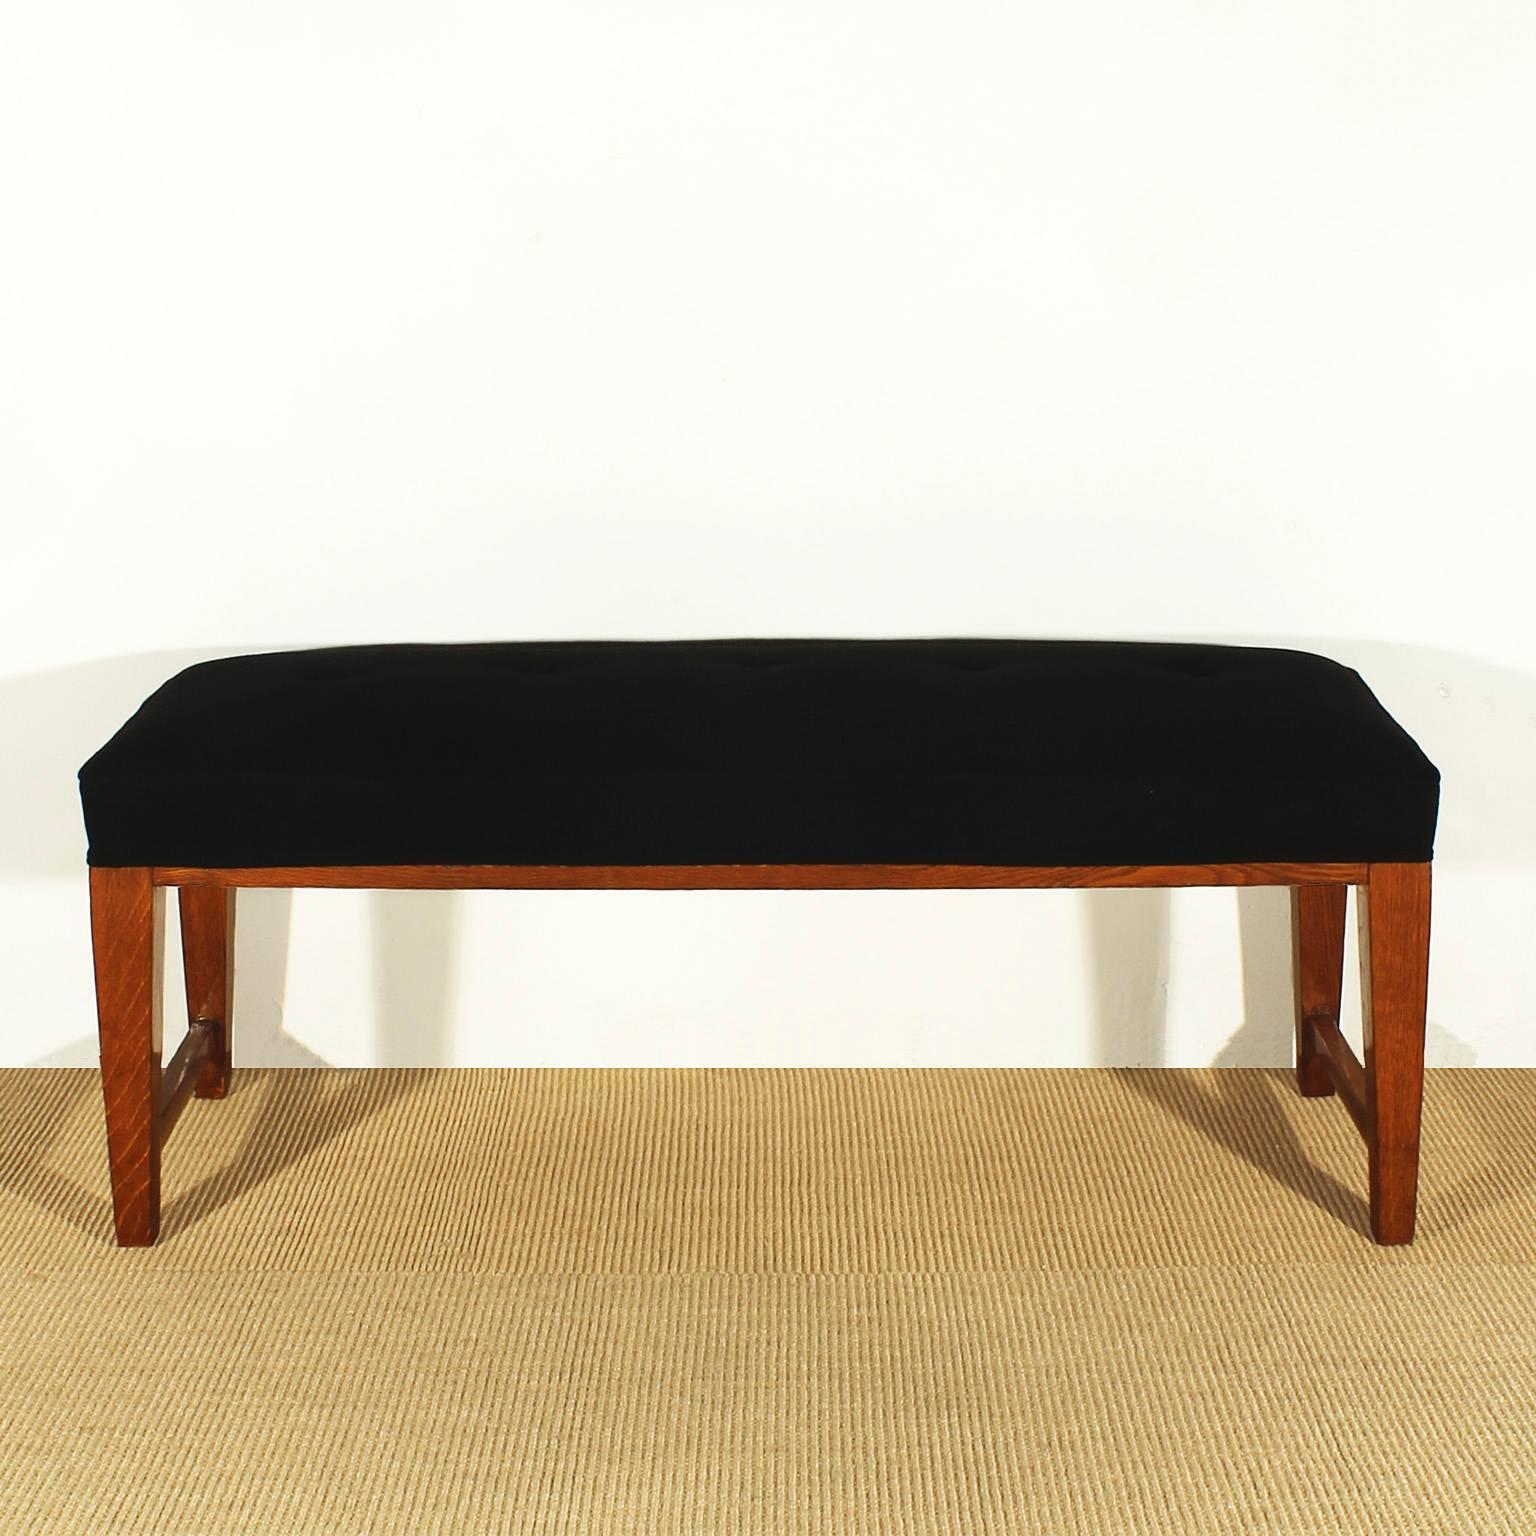 Bench made of solid oak wood, french polish, new black wool upholstery with buttons and piping strips.
France c. 1940